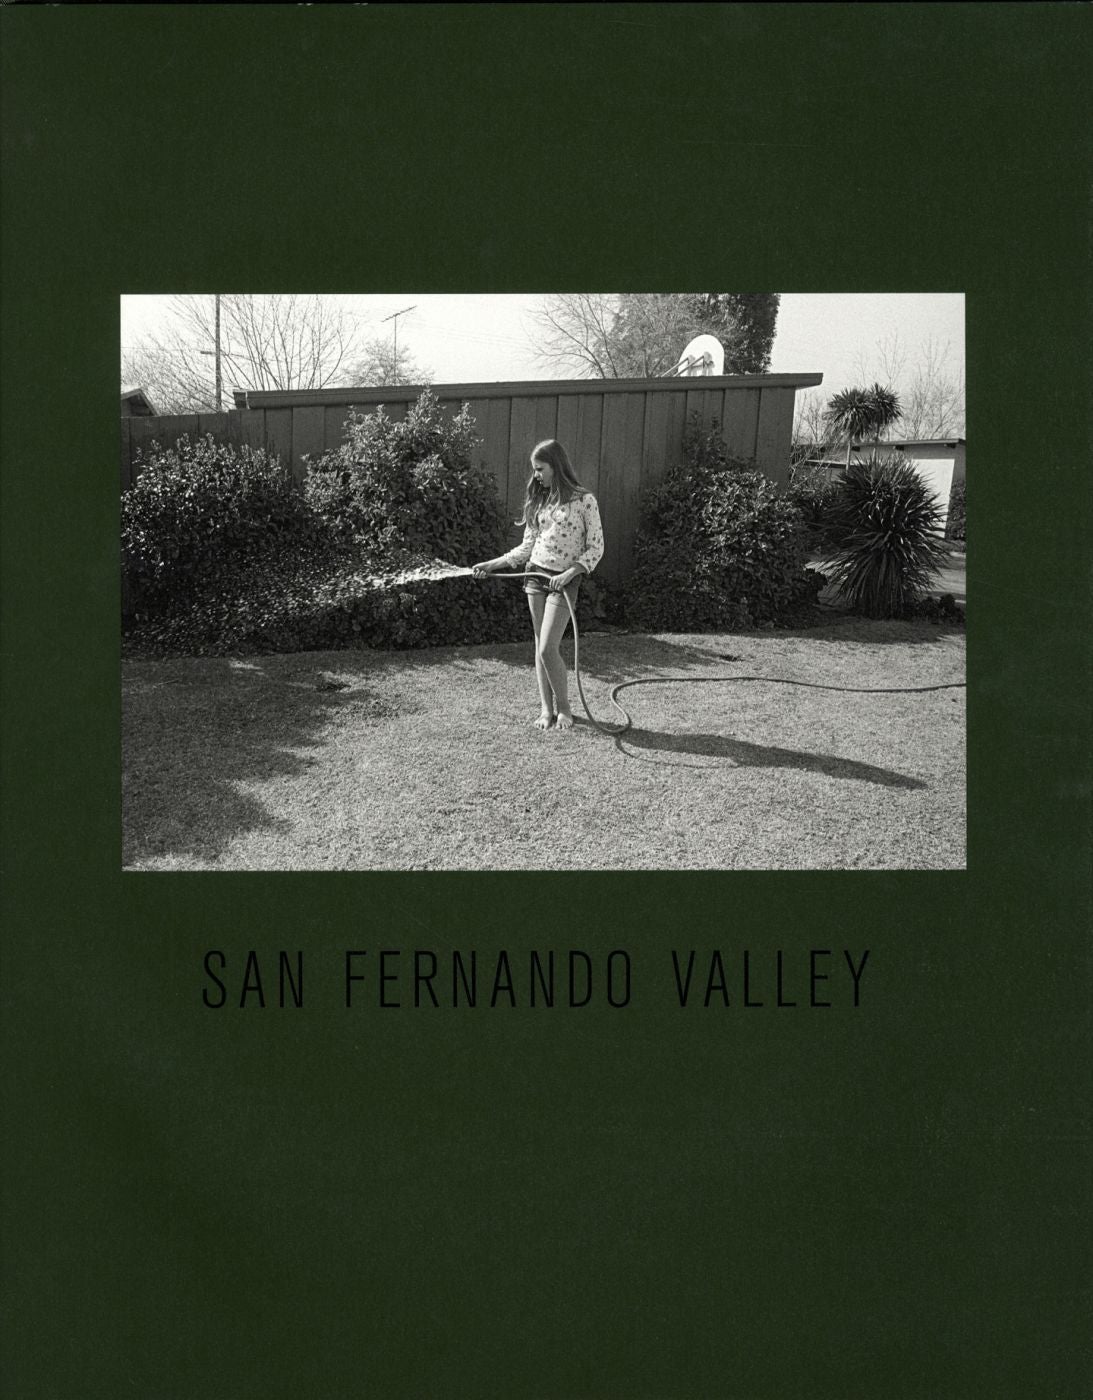 NZ Library #1: John Divola: San Fernando Valley, Limited Edition (NZ Library - Set One, Volume Two) [SIGNED]